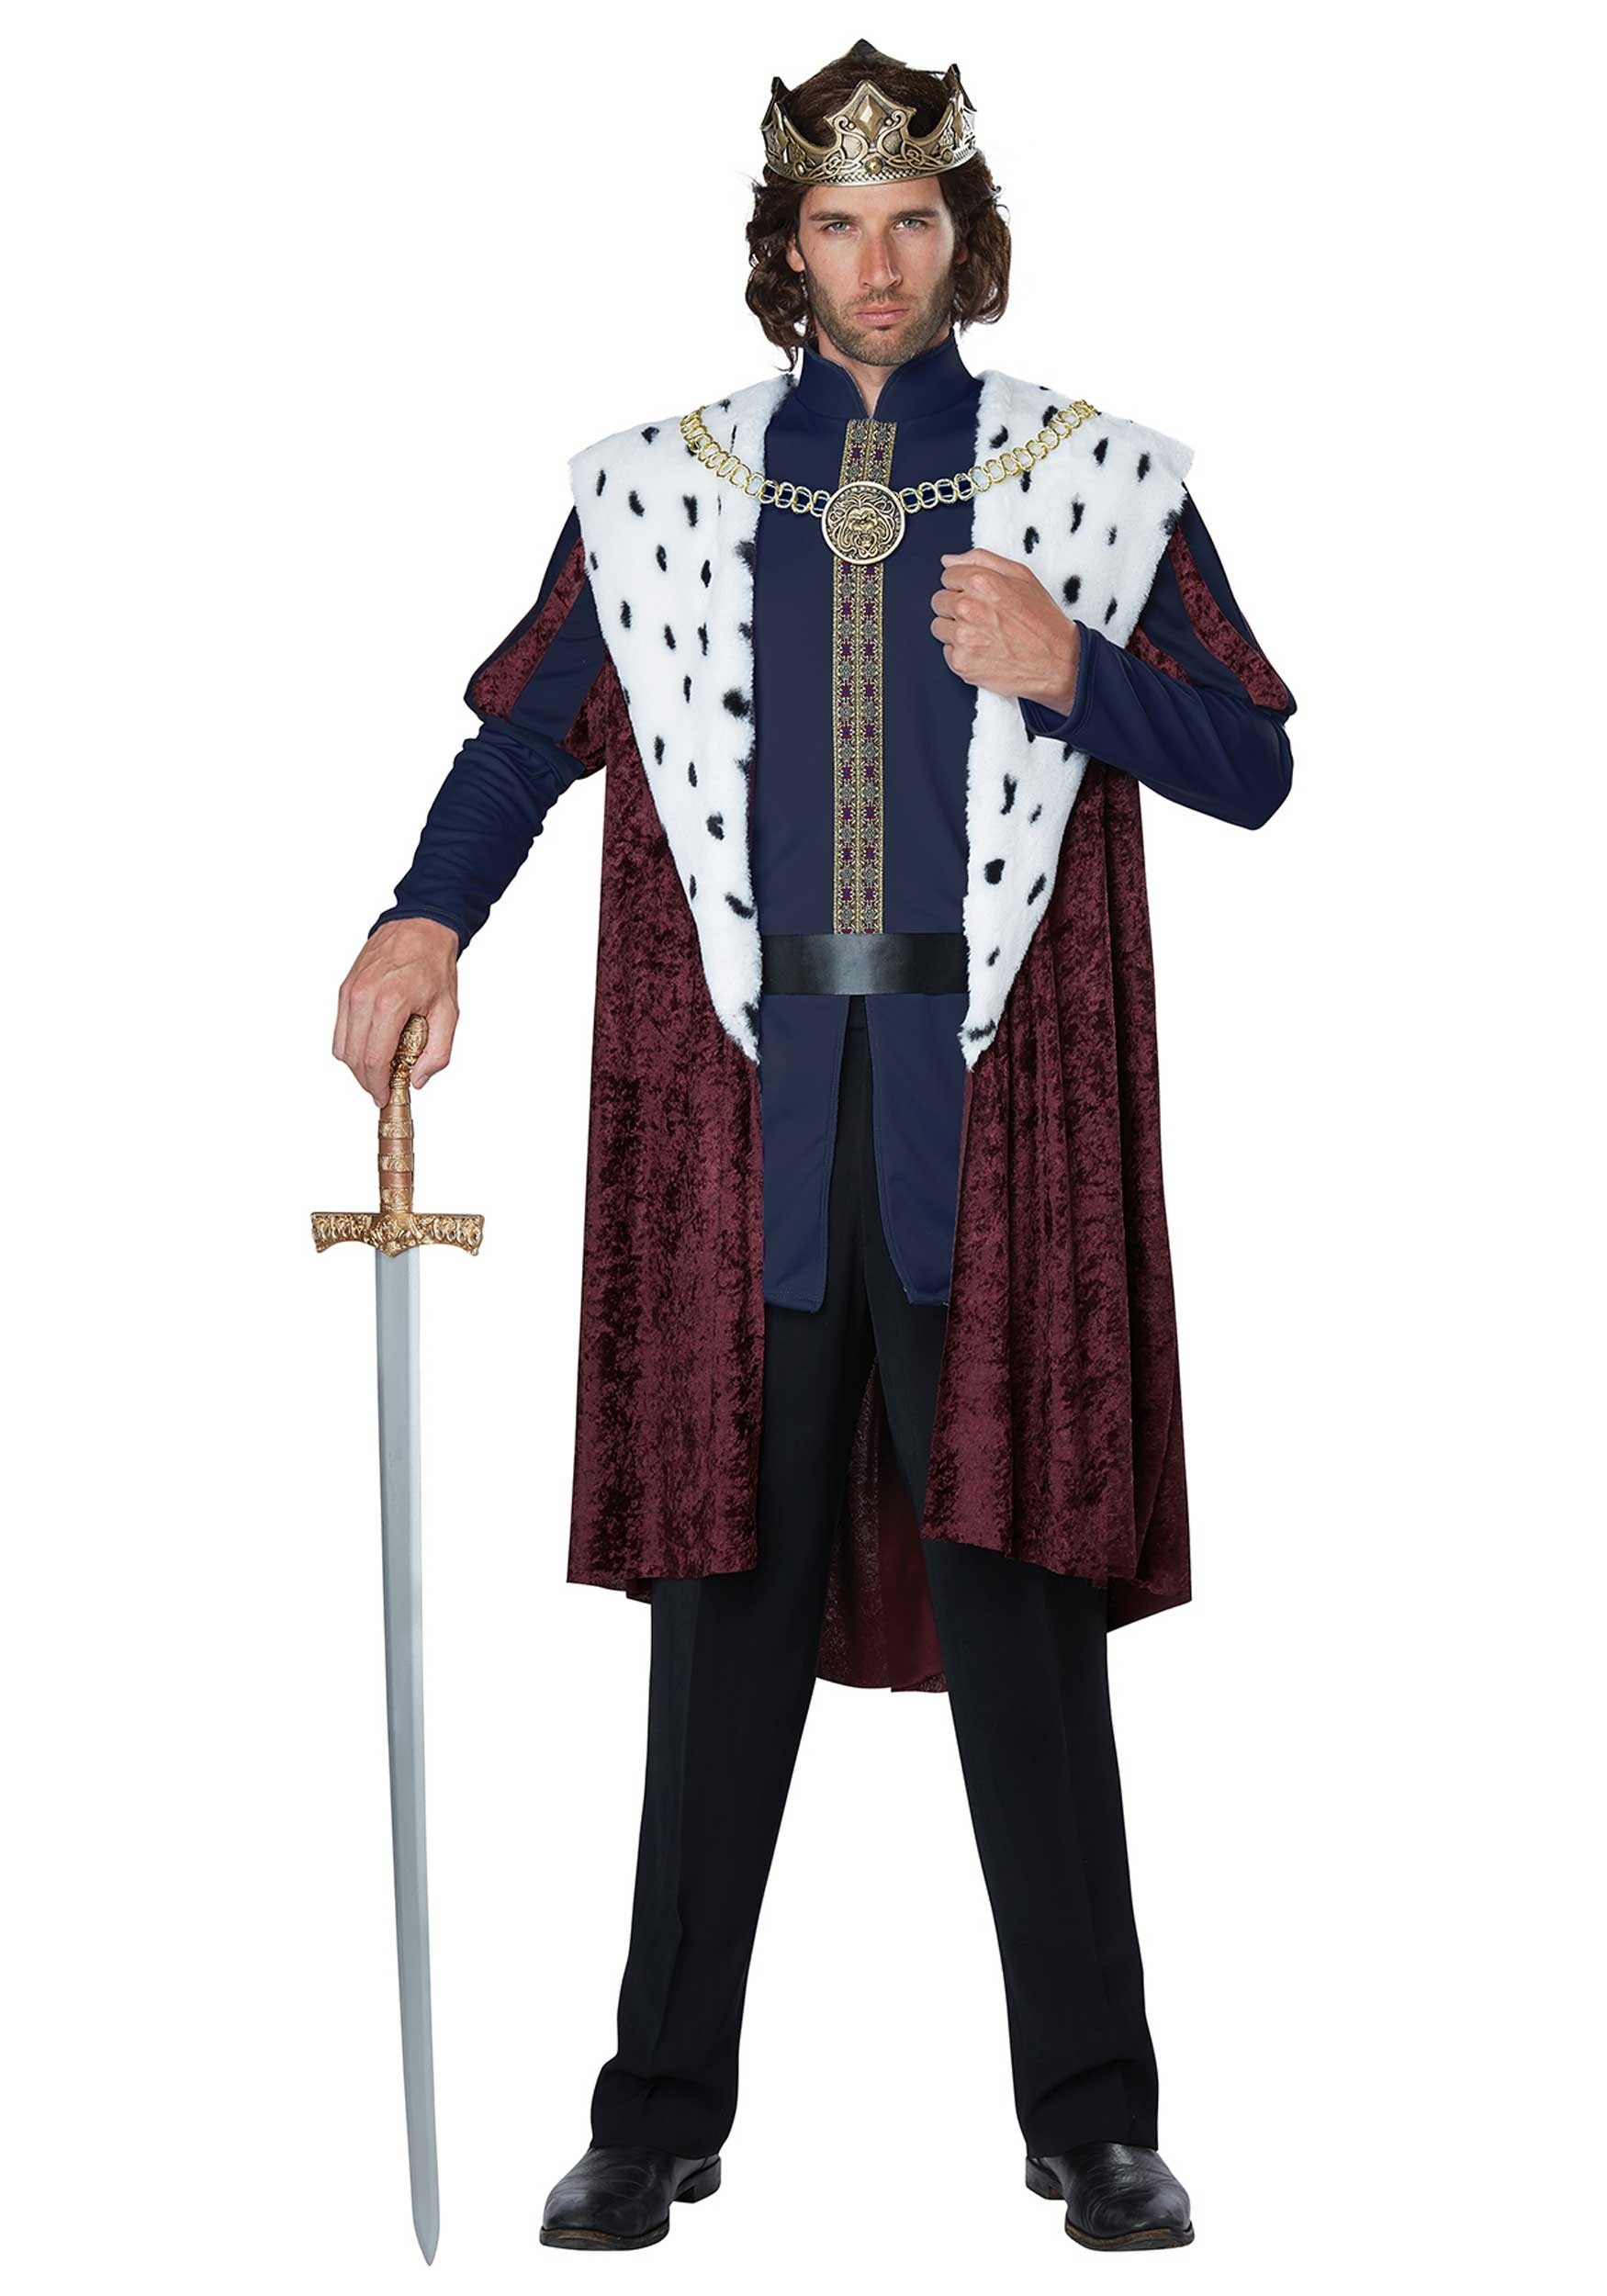 Photos - Fancy Dress California Costume Collection Royal King Men's Costume Red/Blue/Wh 